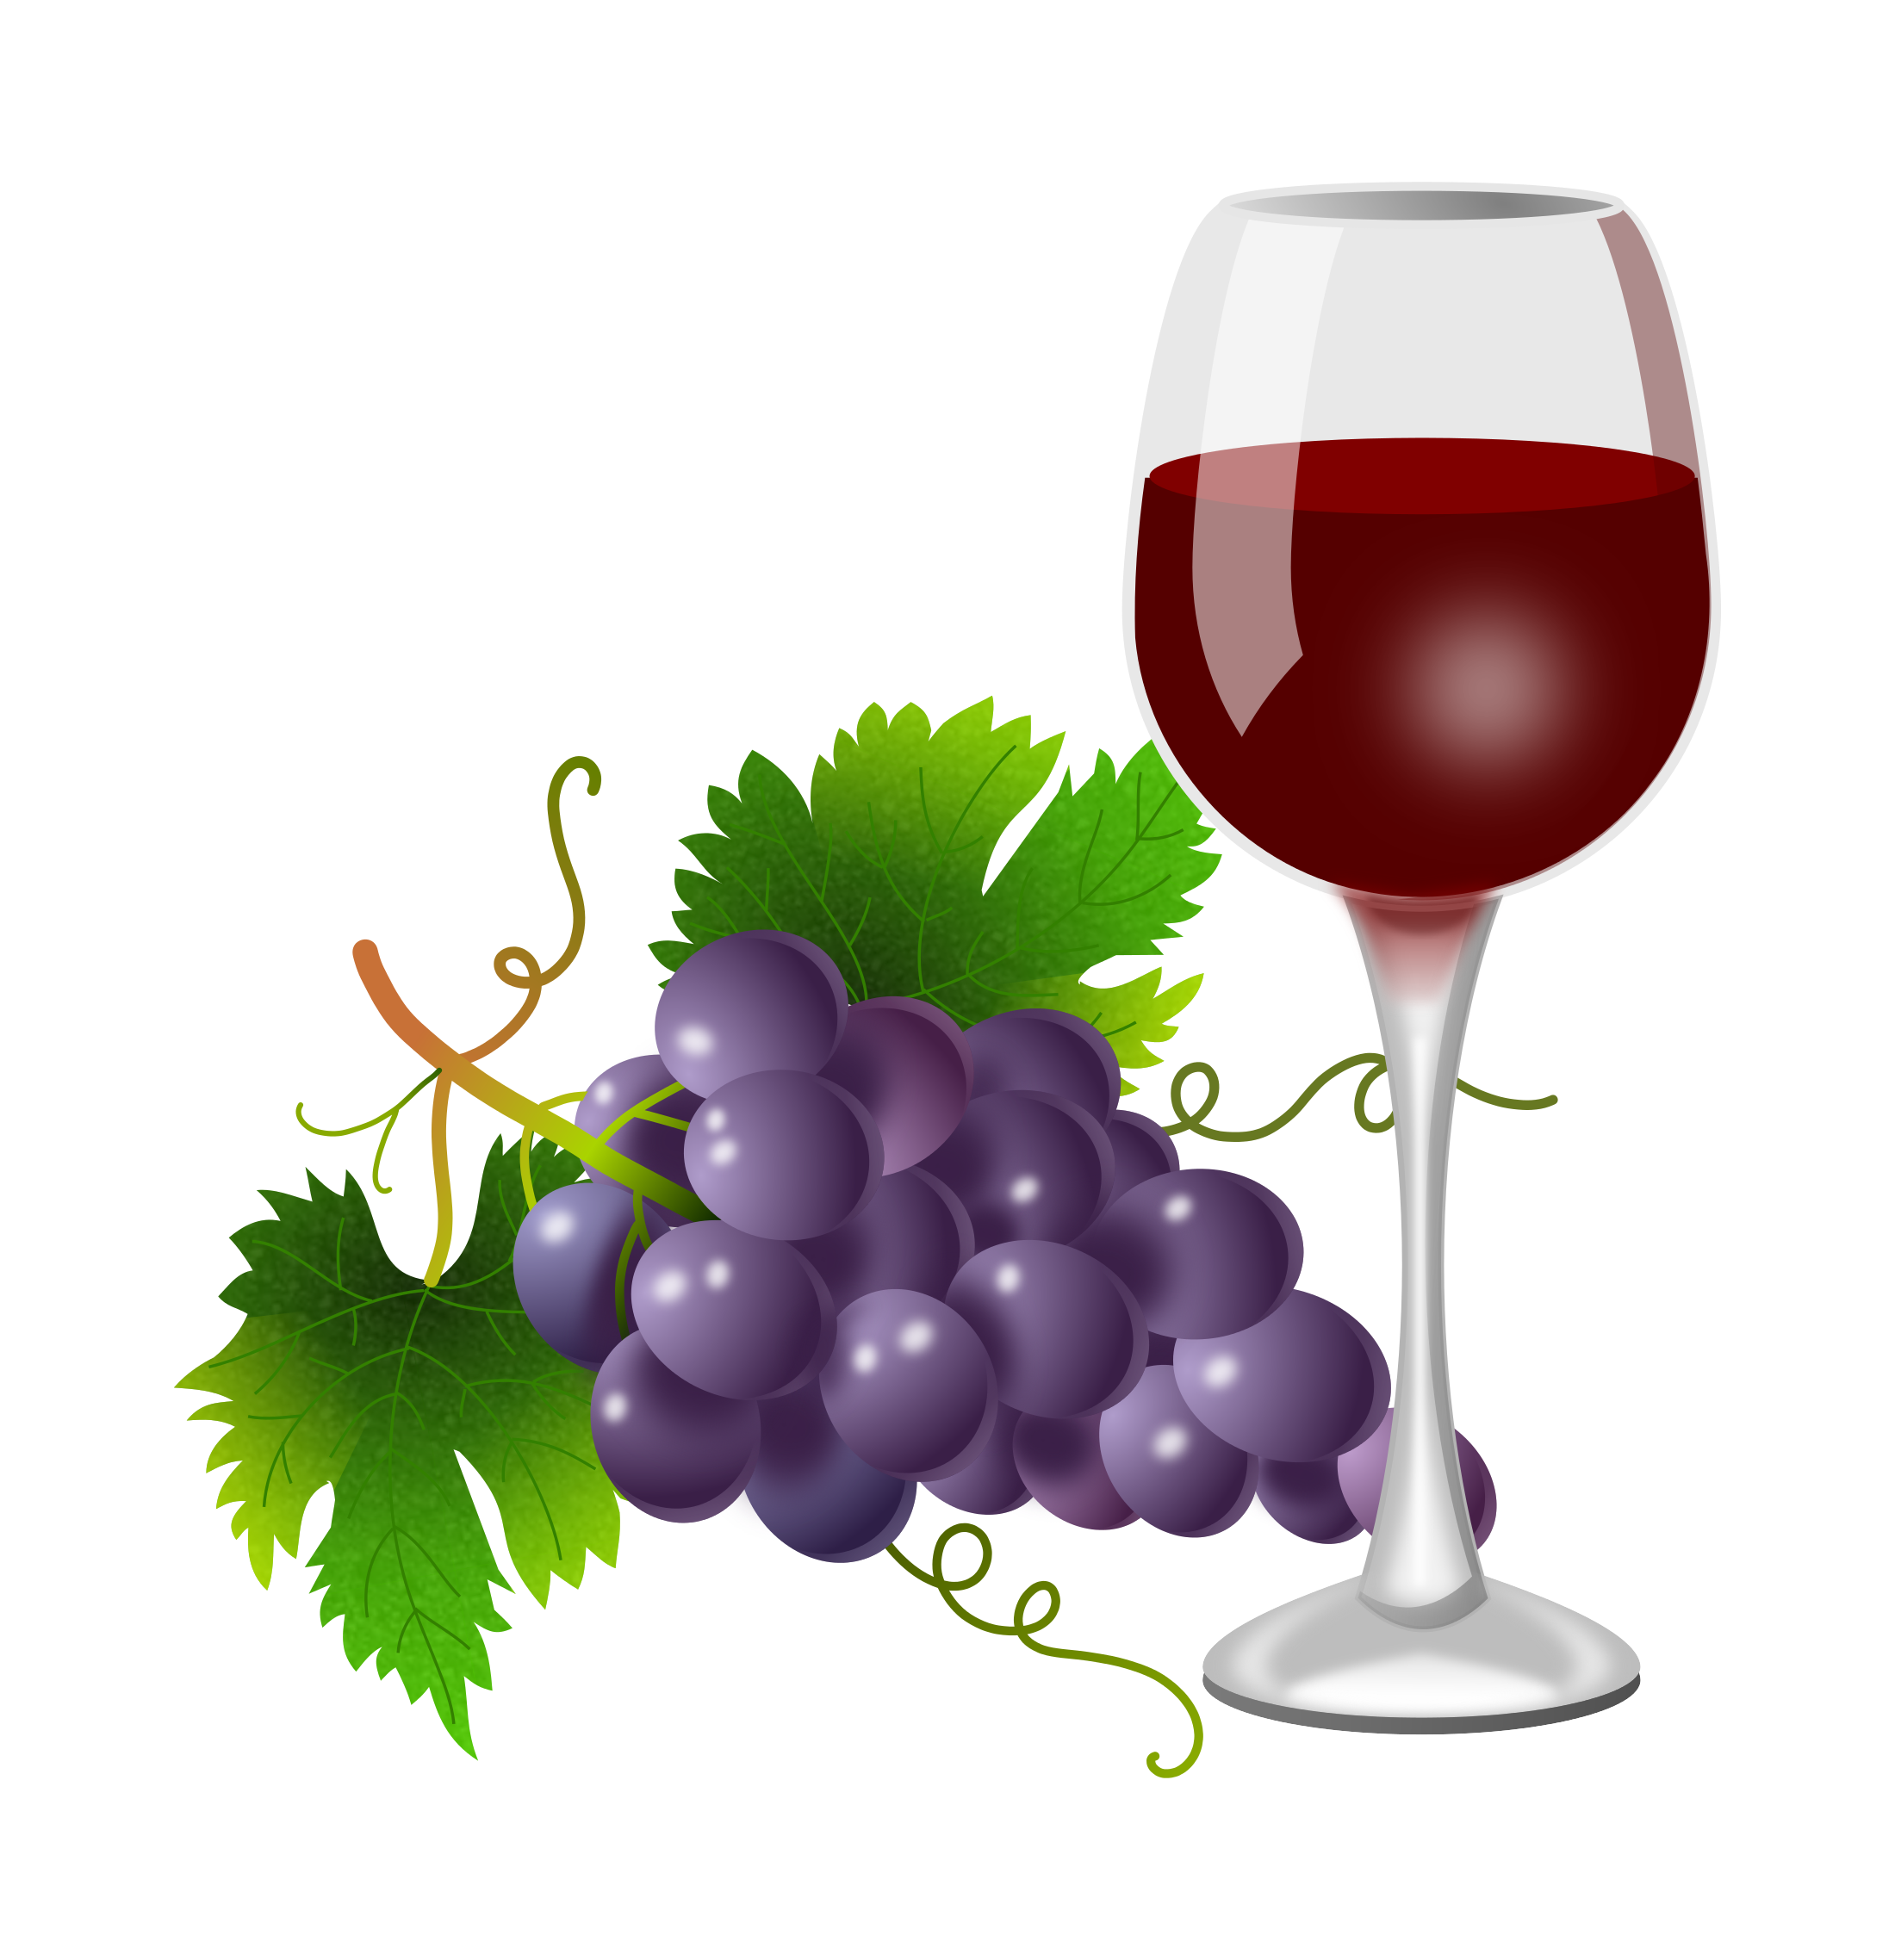 Grapes and wine free. Grape clipart winery